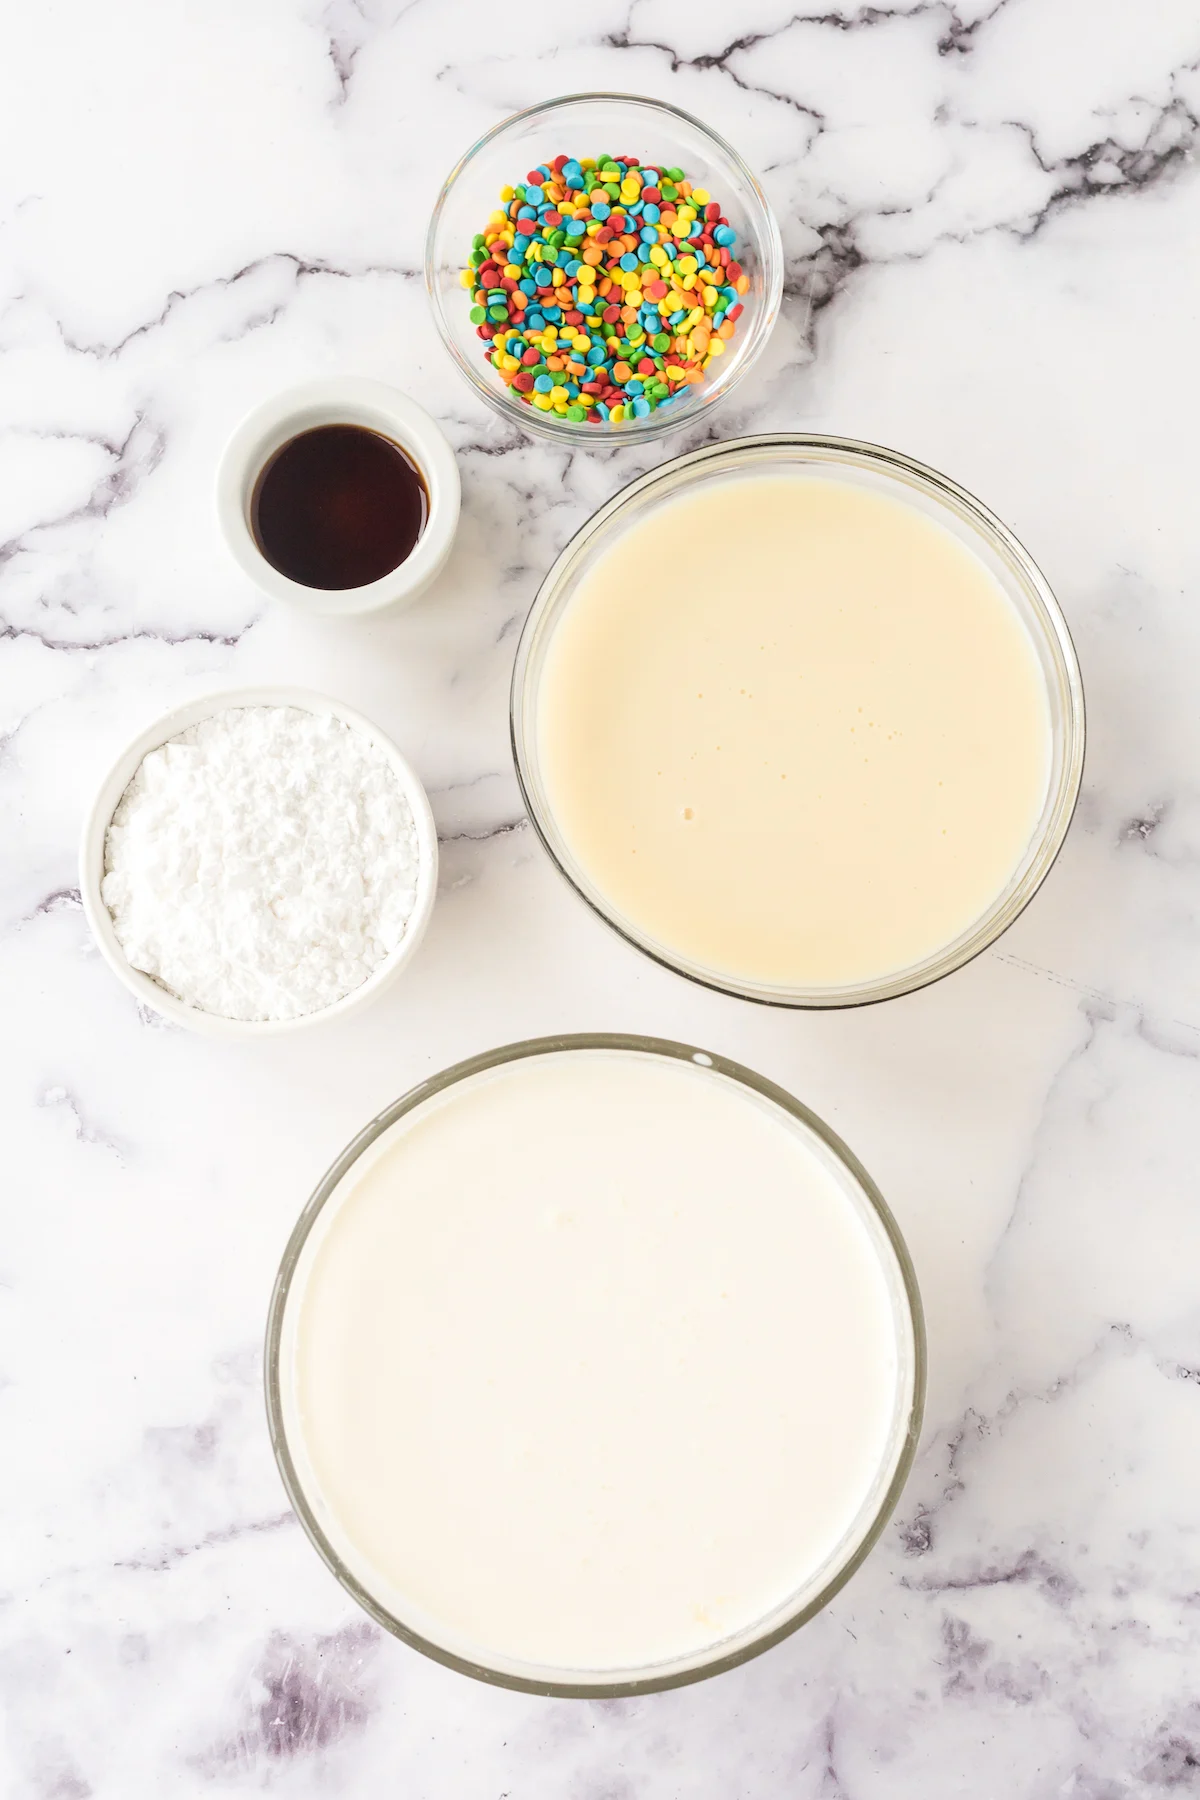 over the top view of 5 ingredient ice cream ingredients